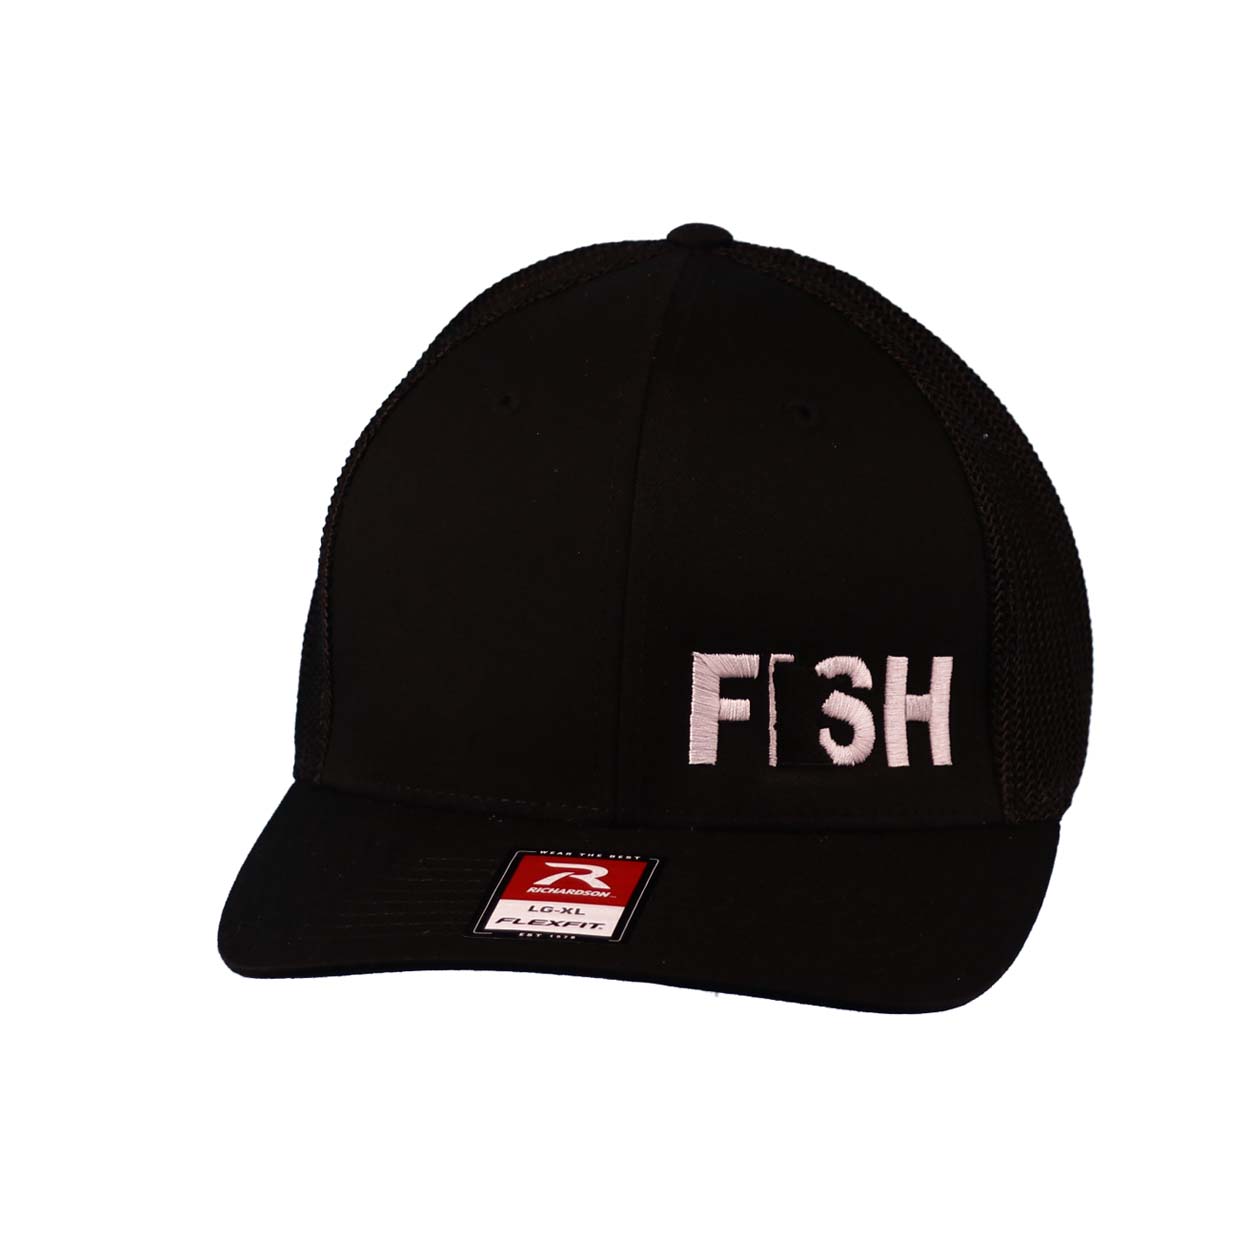 Fish Minnesota Night Out Embroidered Mesh Flexfit Hat Black/White